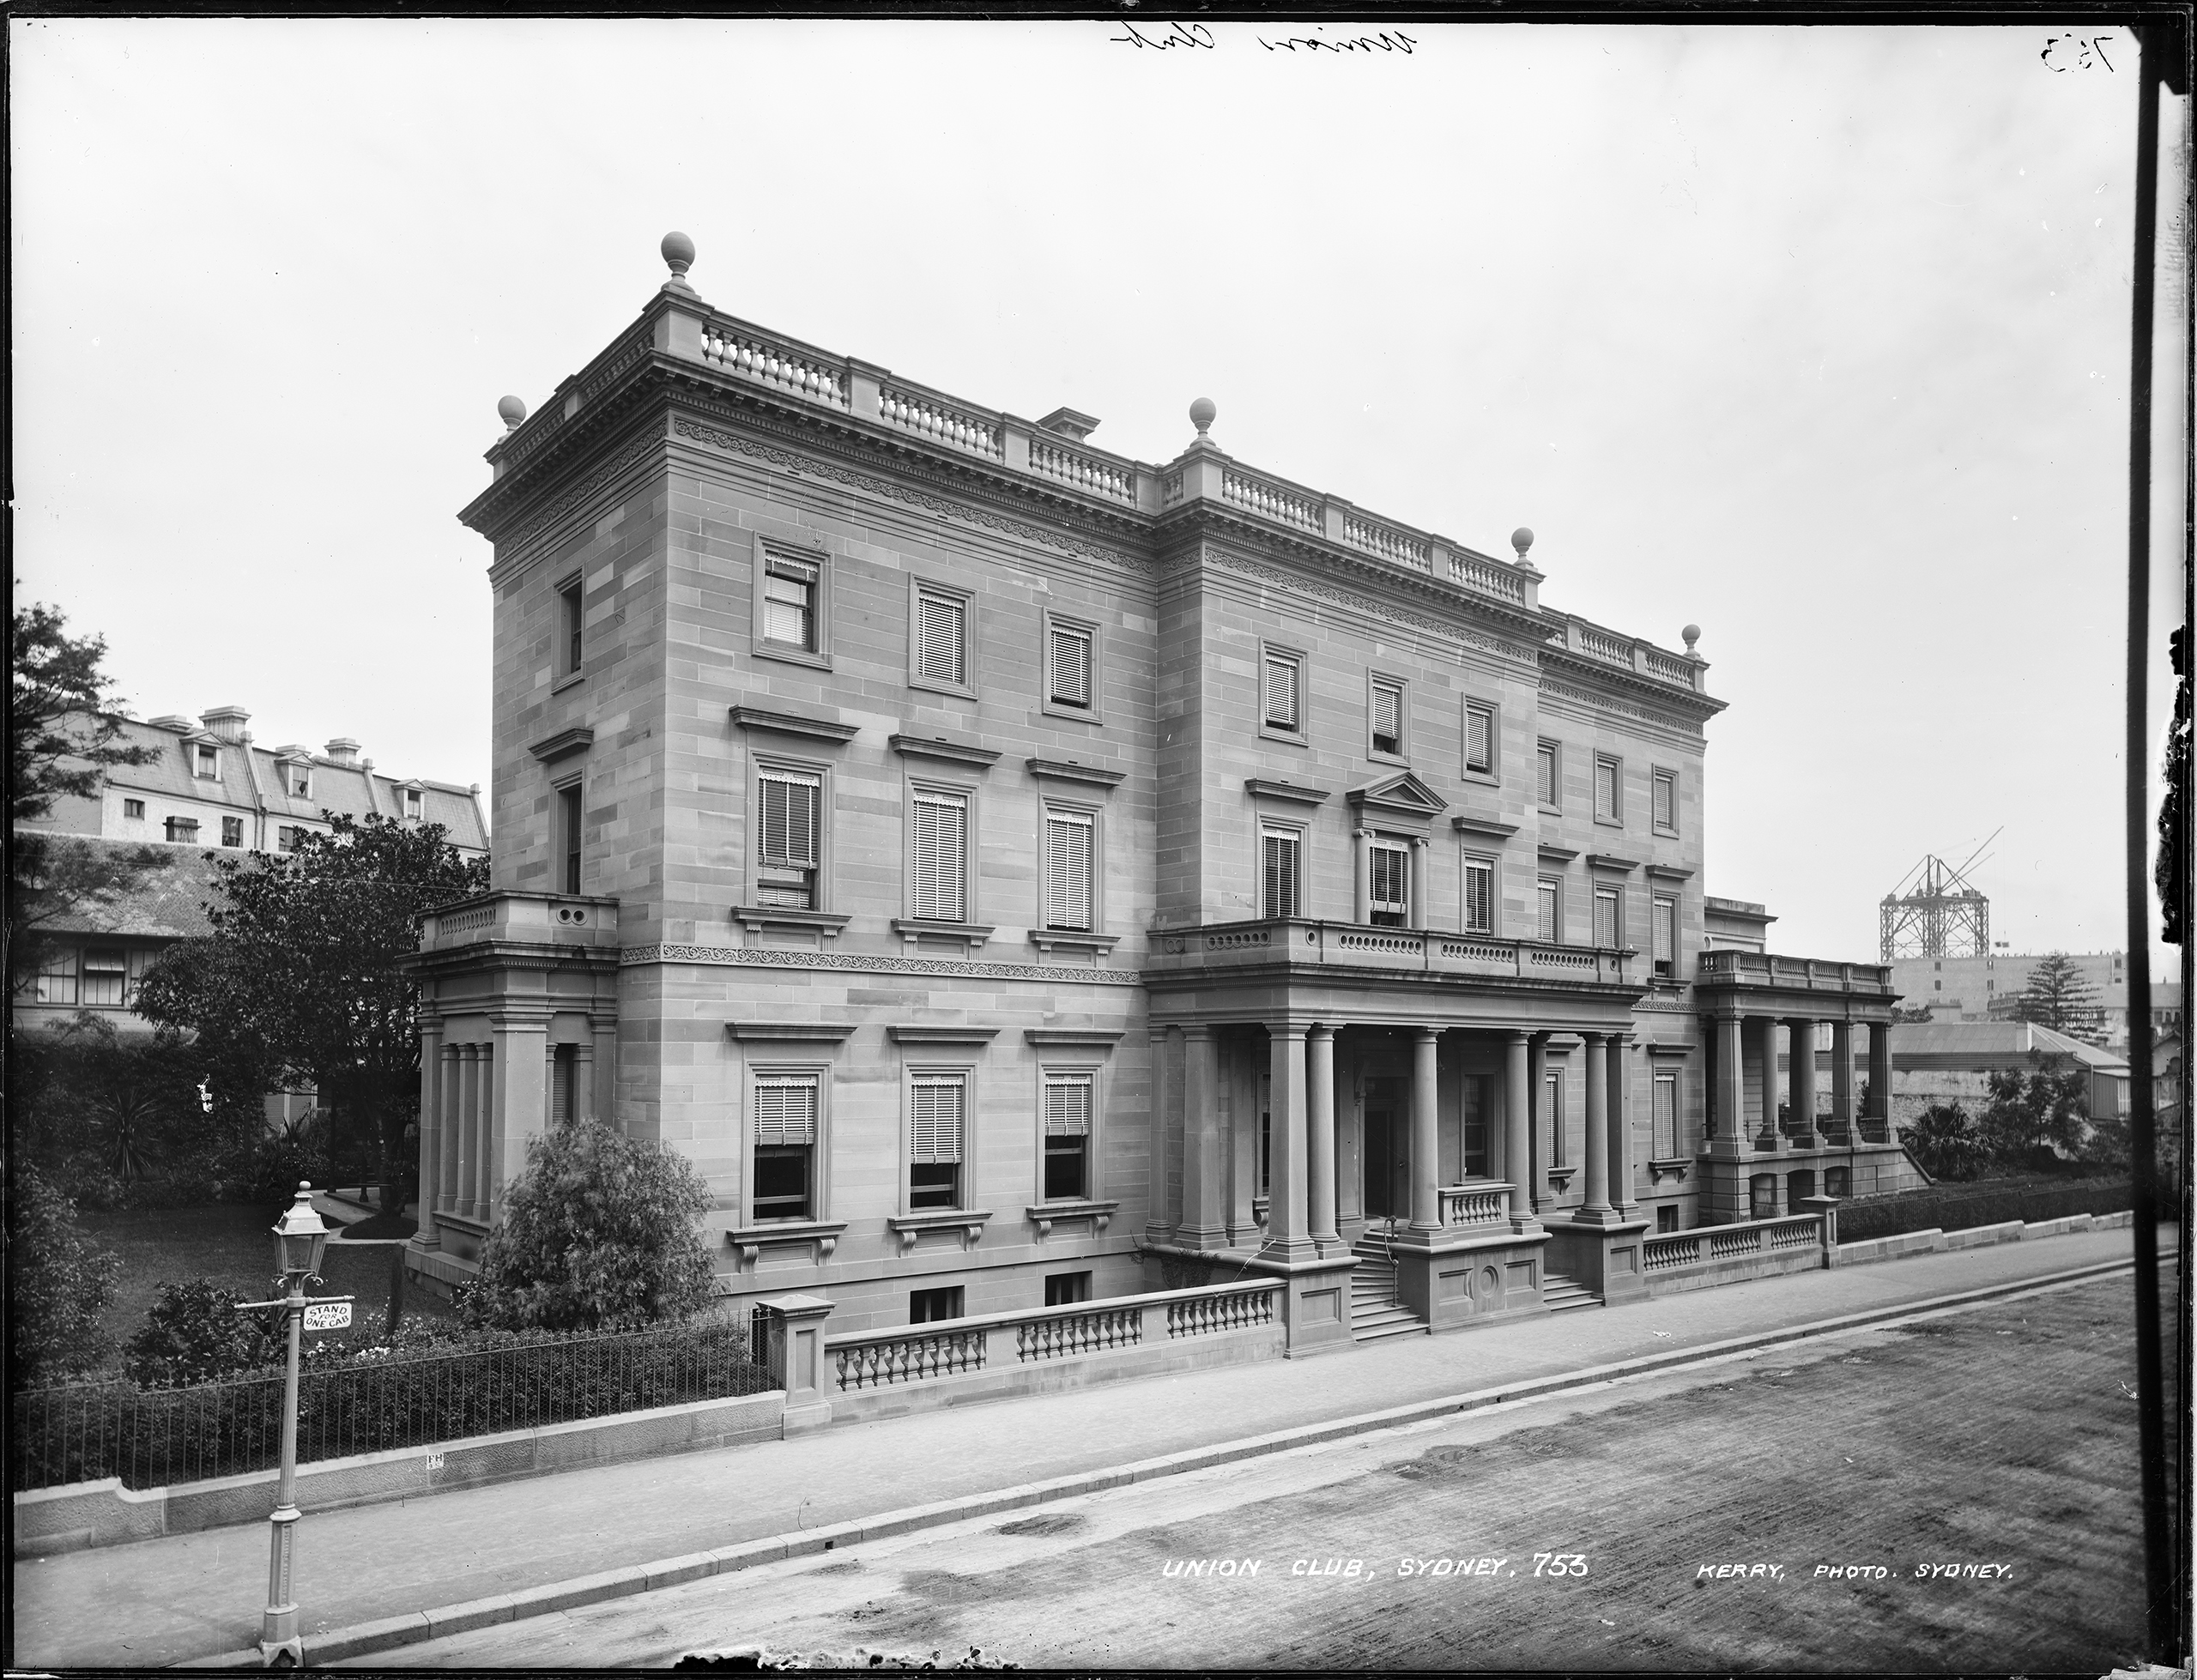 'Union Club, Sydney' by Kerry and Co from the Tyrrell Collection